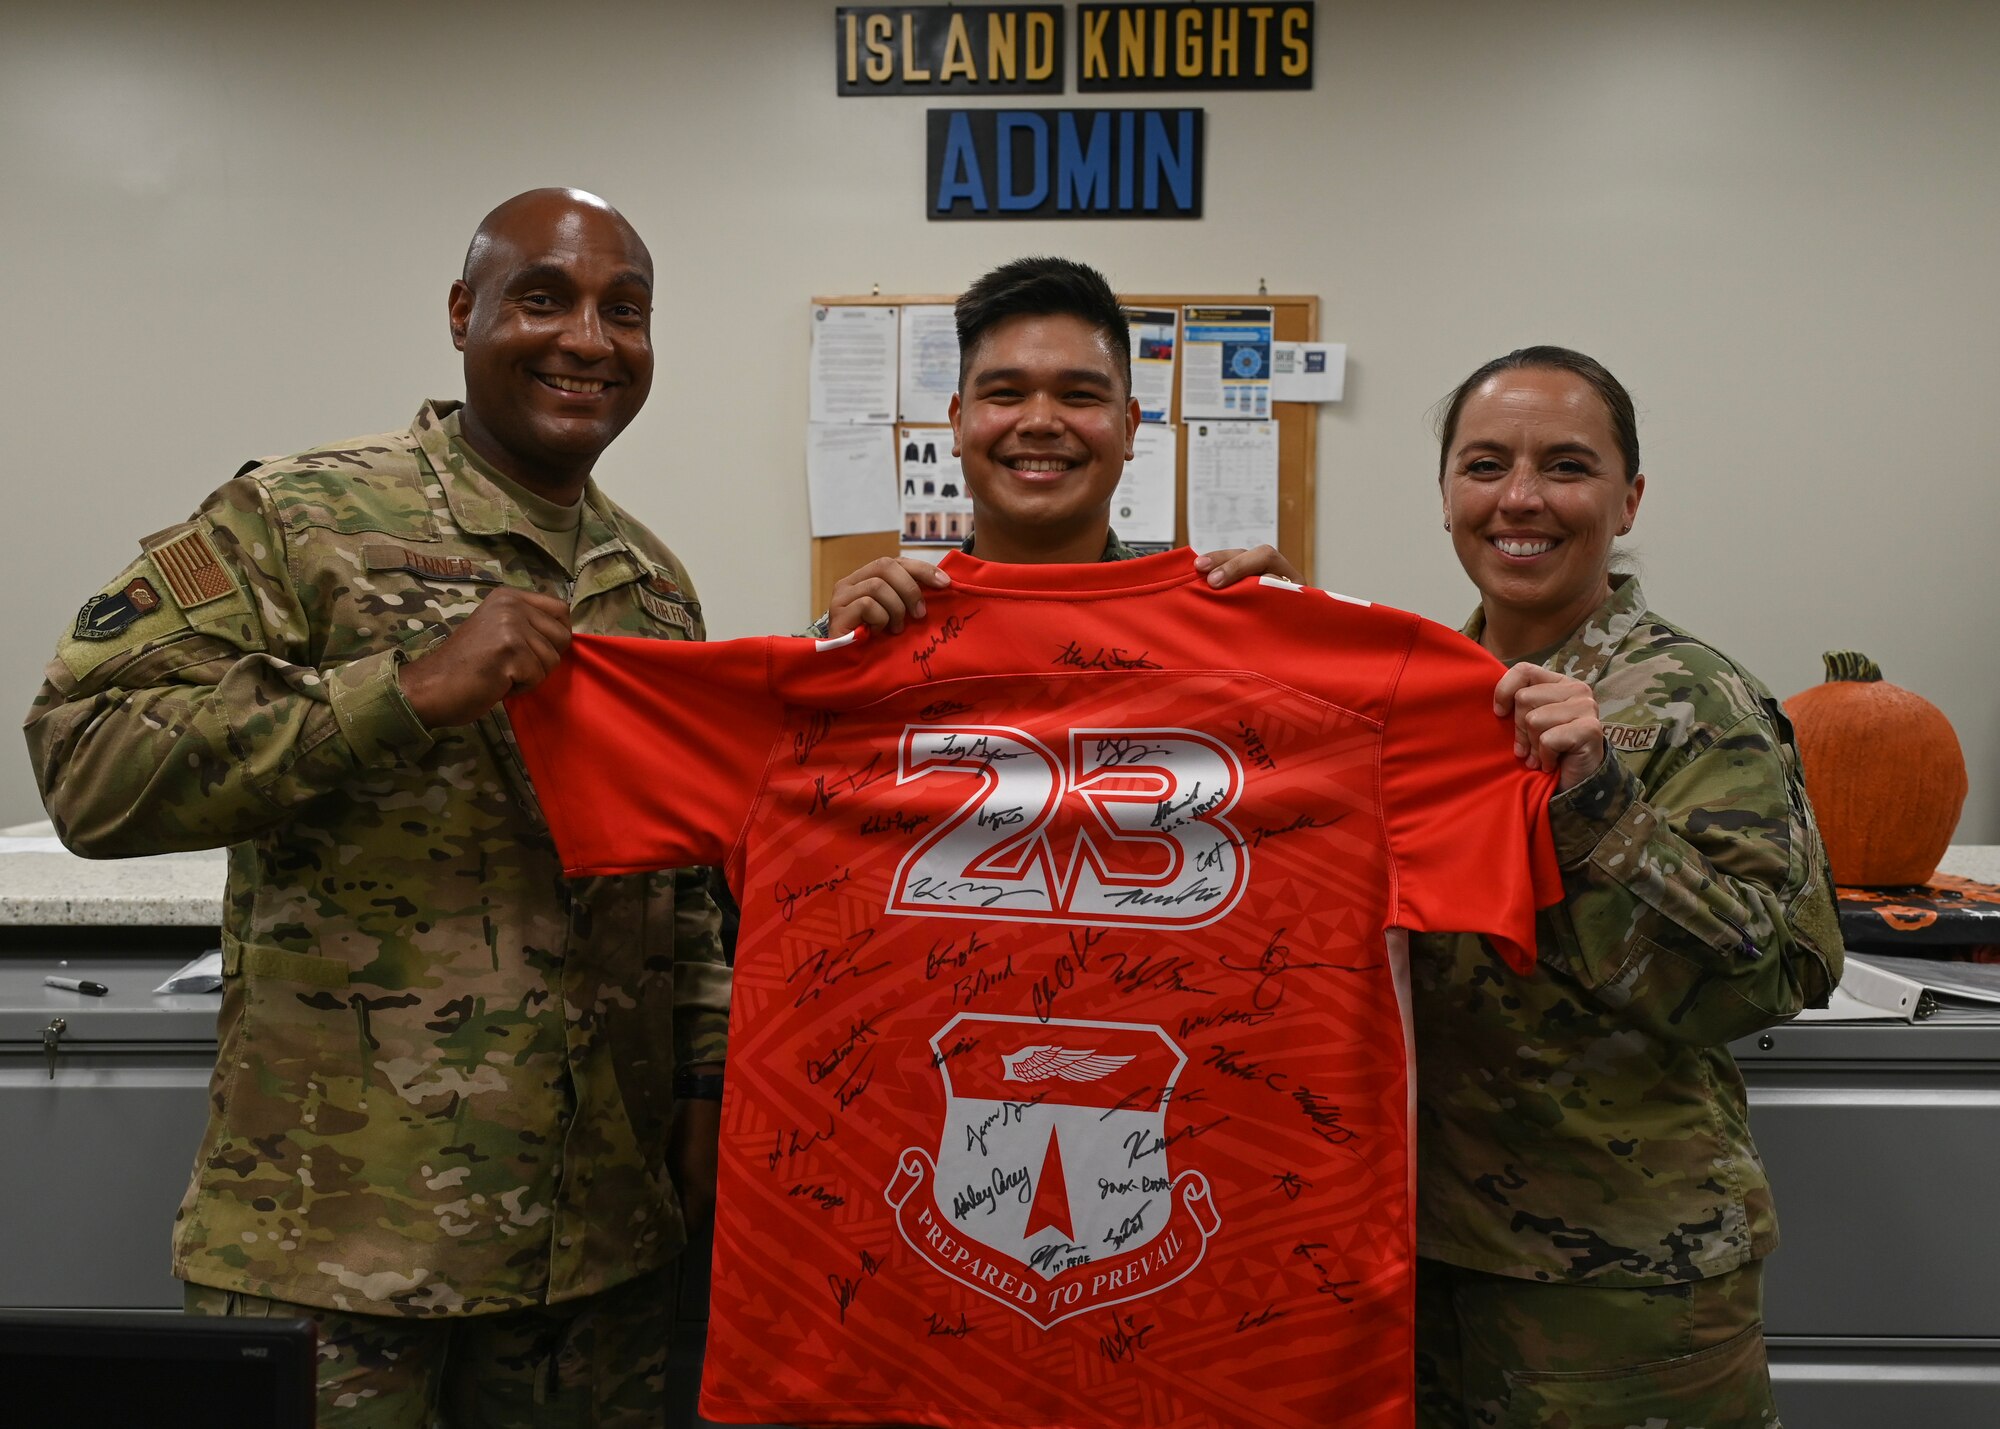 Two Airmen and a Sailor pose for a photo while holding a jersey together.